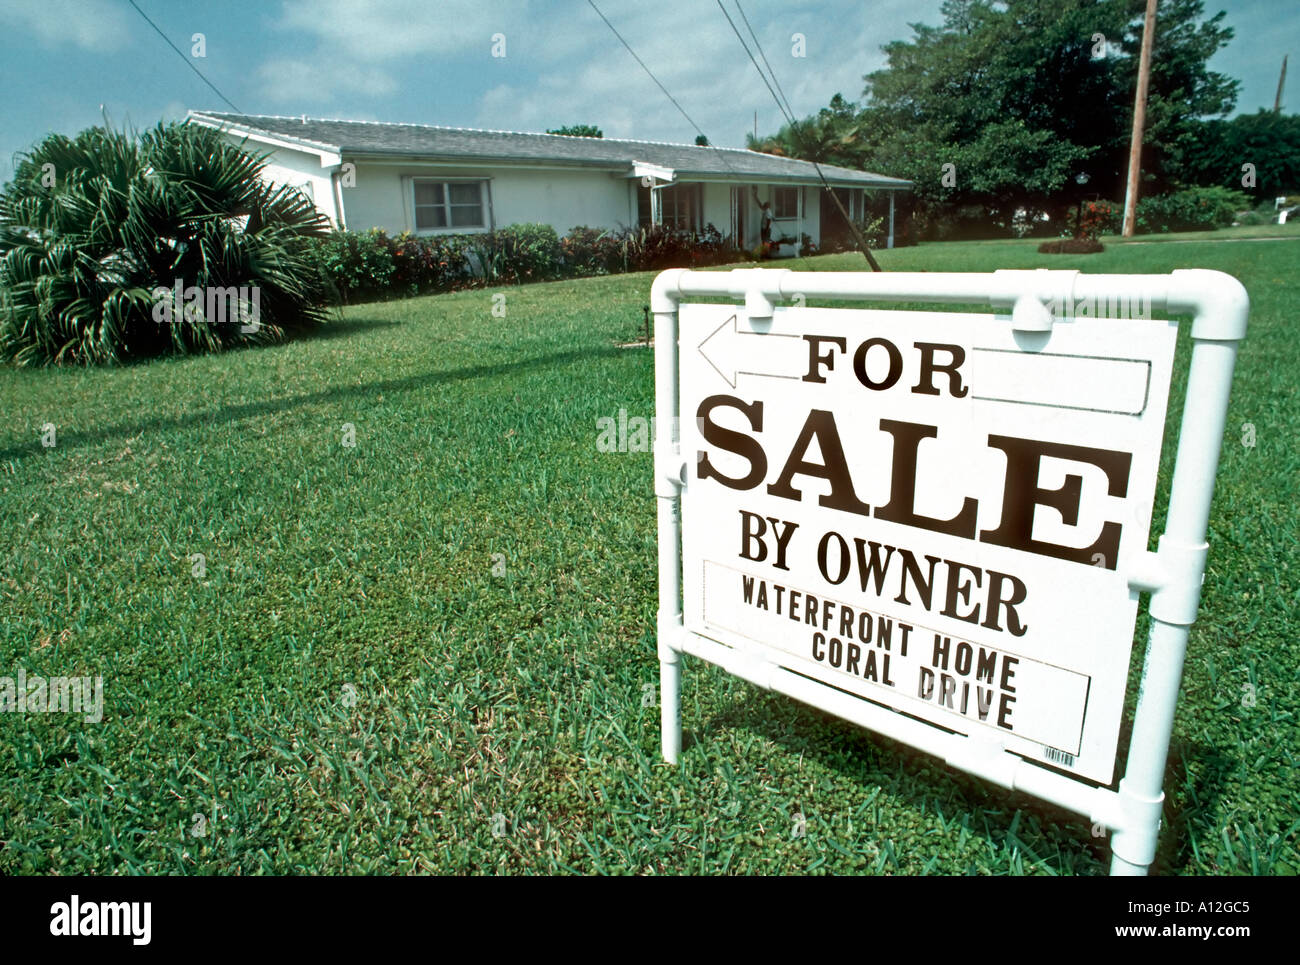 An Estate Agent's For Sale Sign, West Palm Beach, Florida, USA, Single Family House in Front Stock Photo